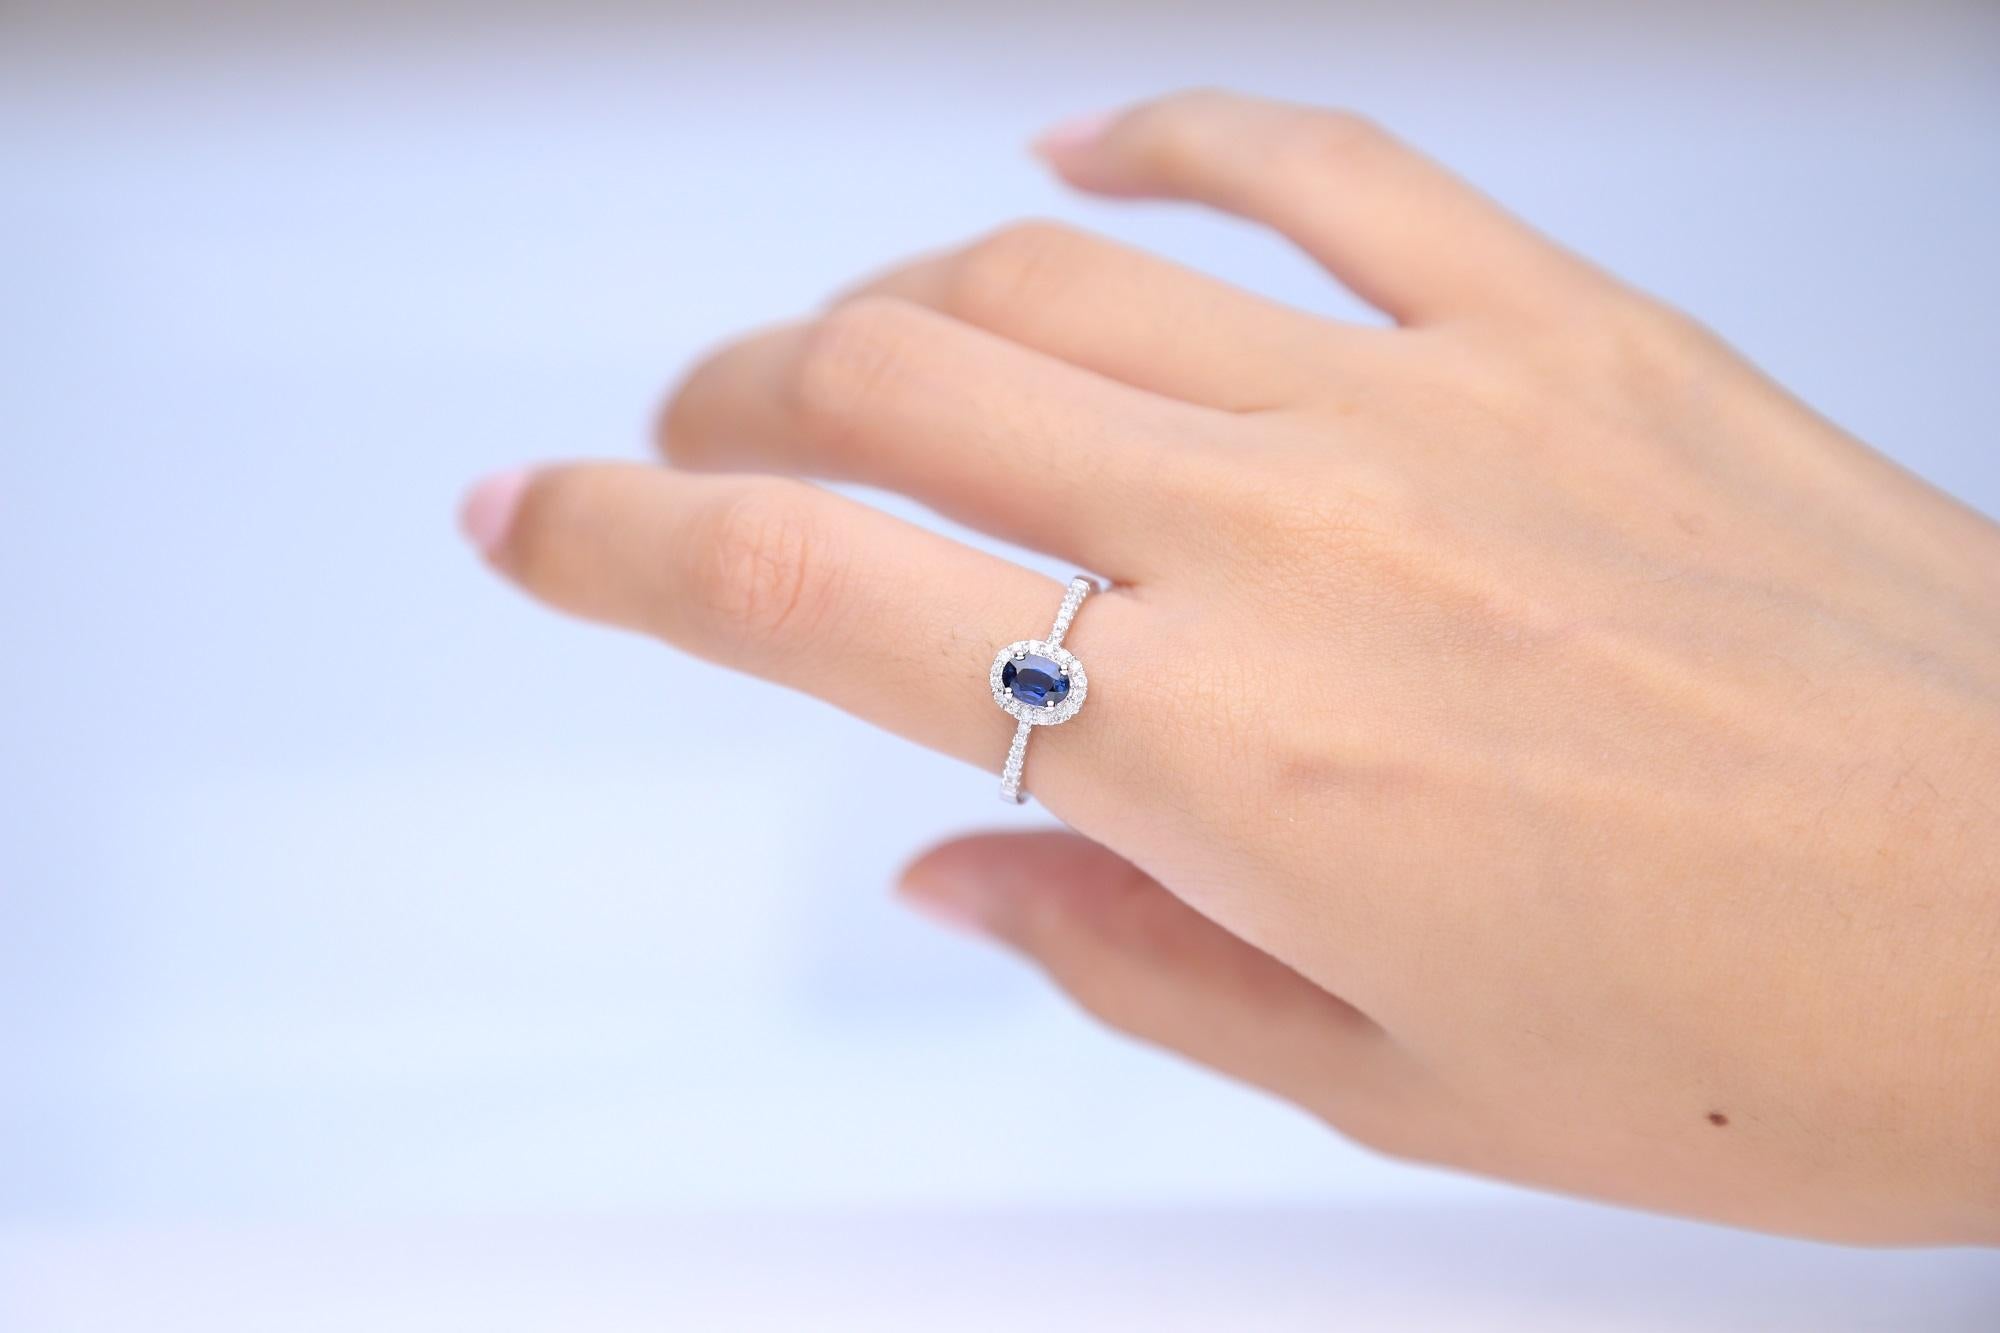 Stunning, timeless and classy eternity Unique Ring. Decorate yourself in luxury with this Gin & Grace Ring. The 14K White Gold jewelry boasts with Oval-cut 1 pcs 0.55 carat Blue Sapphire and Natural Round-cut white Diamond (28 Pcs) 0.16 Carat accent